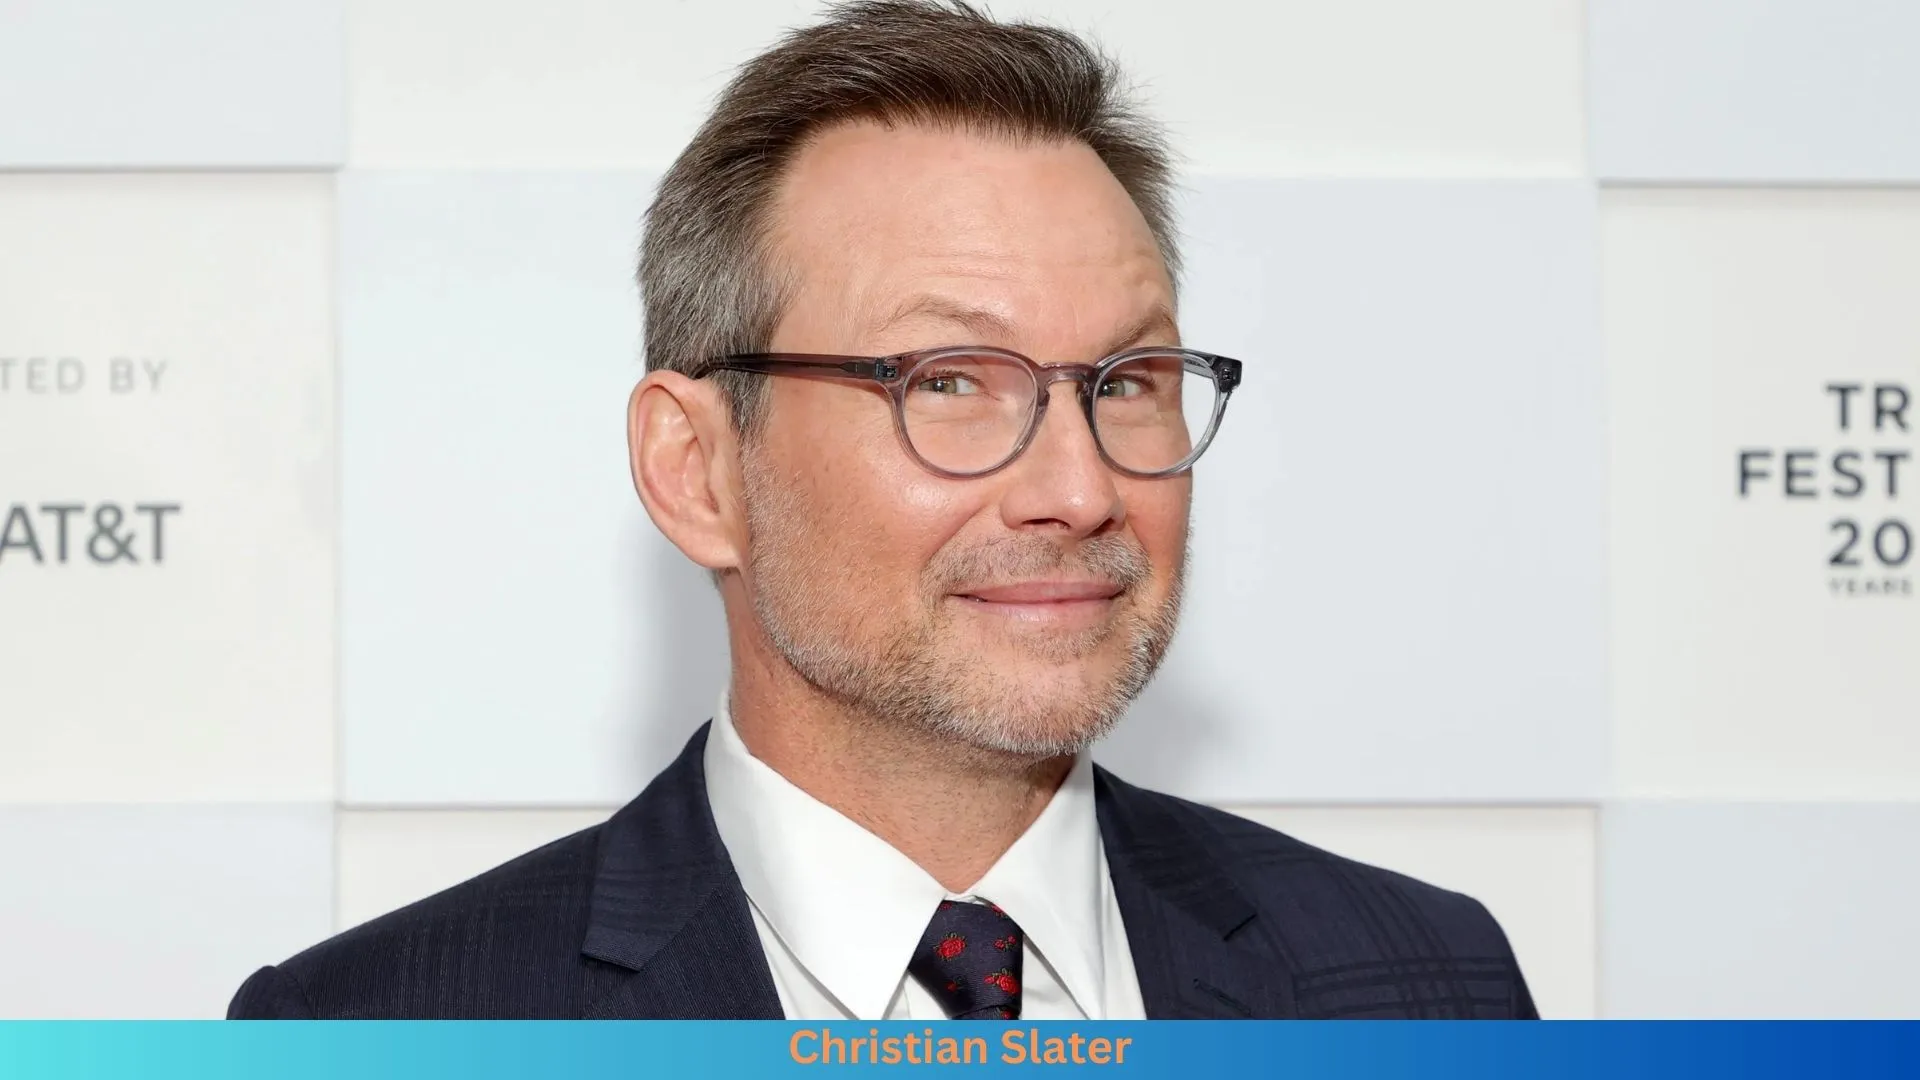 What is the Net Worth of Christian Slater?